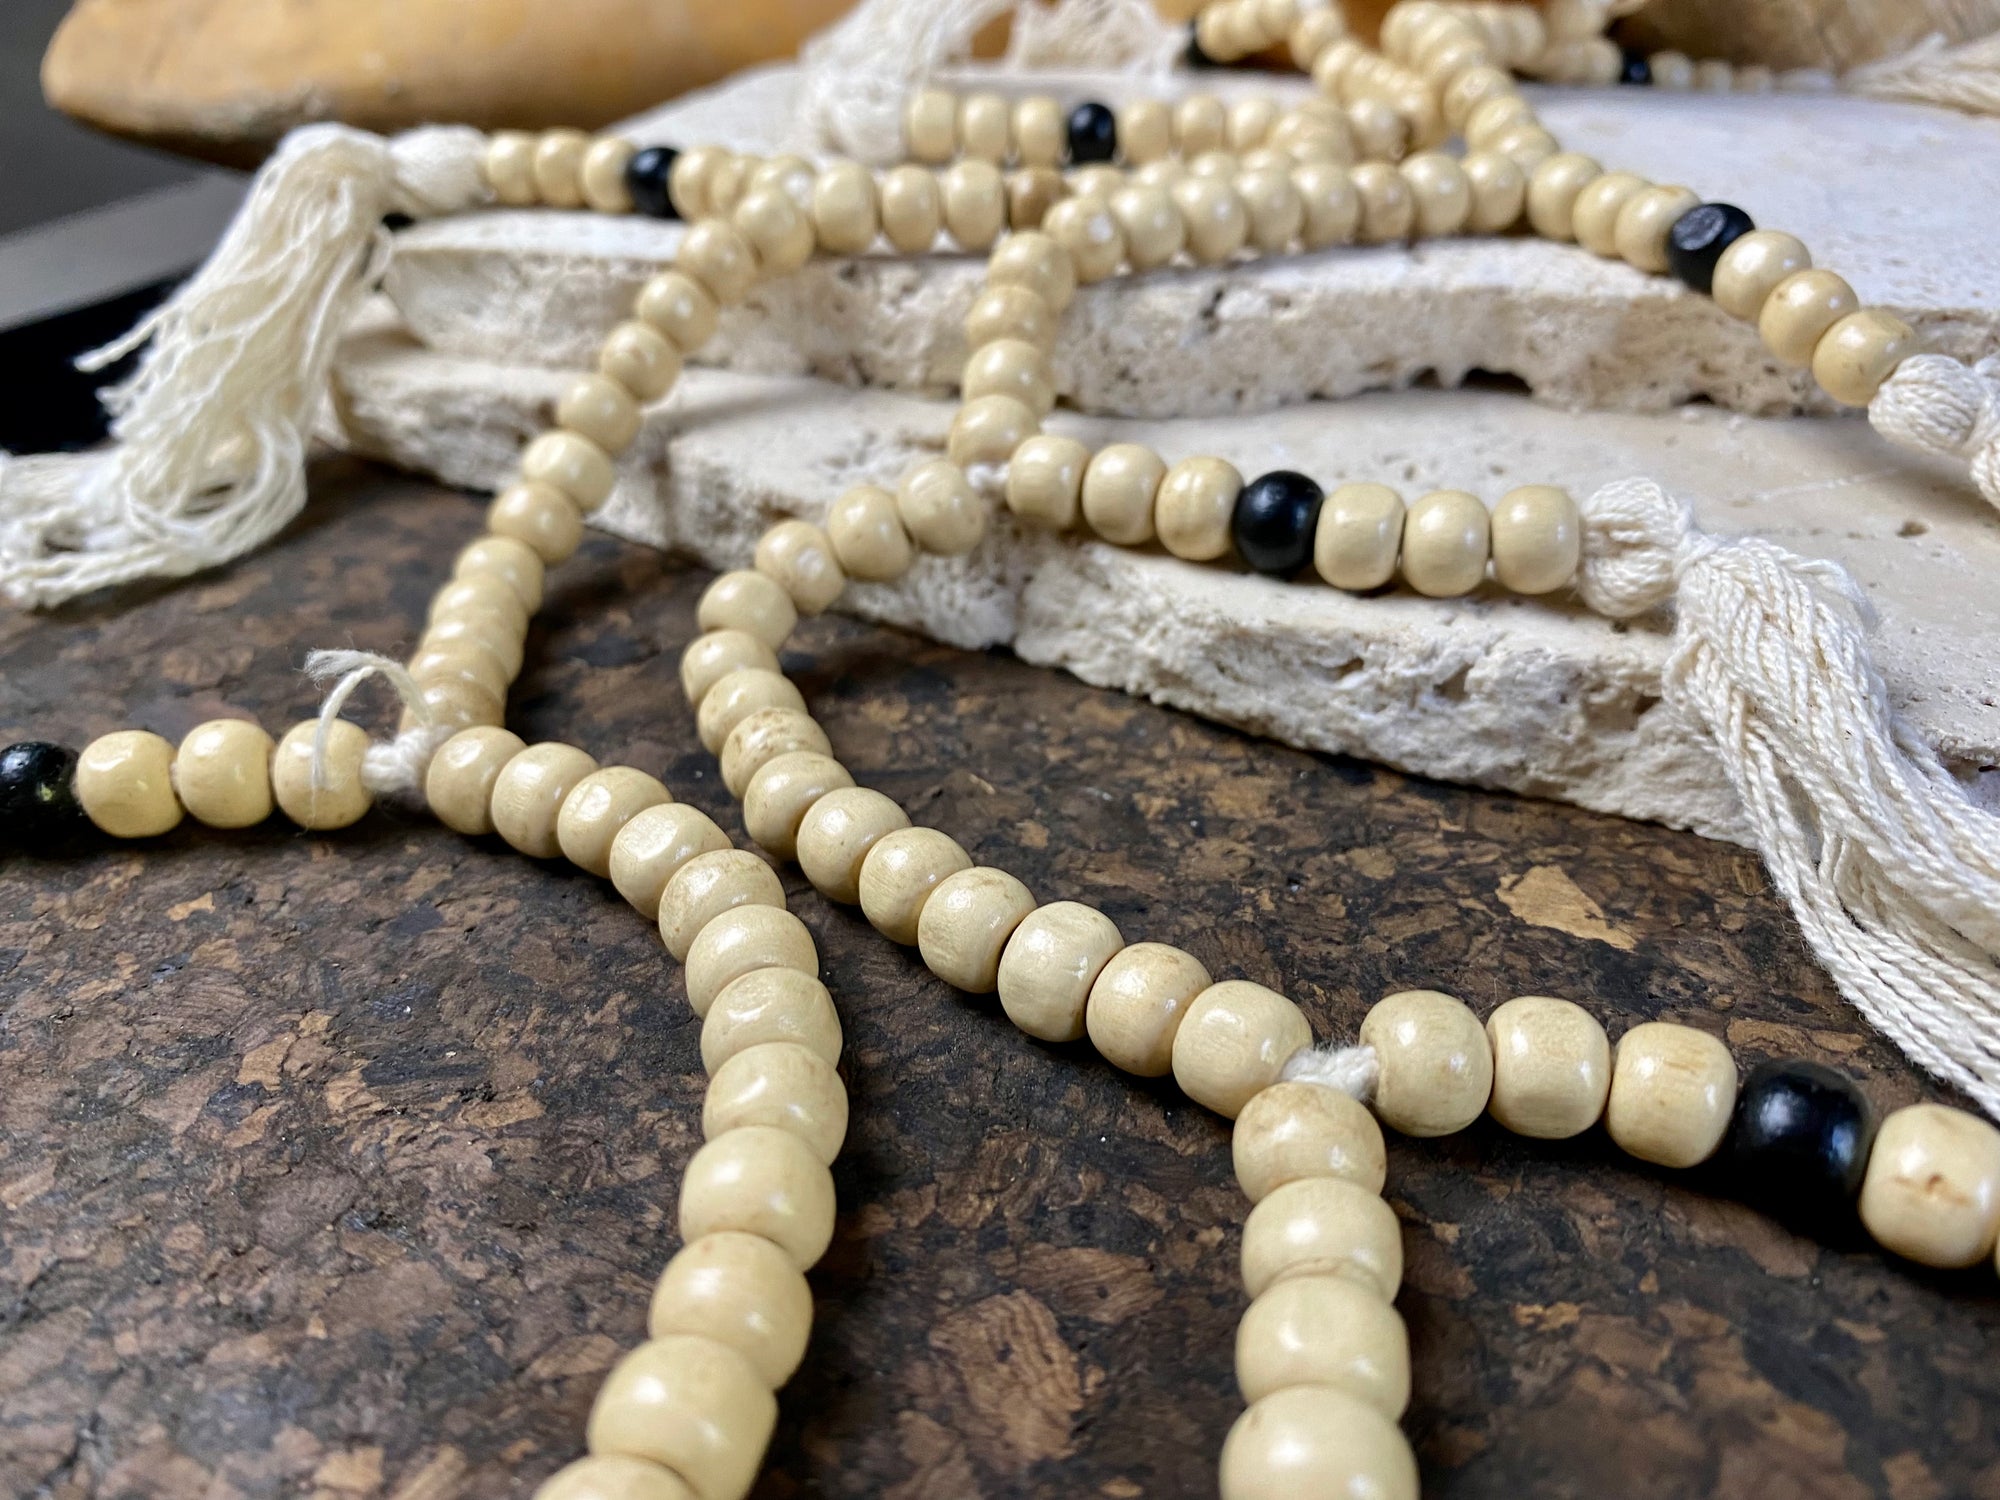 Women or men’s mala necklace. Made from lightweight wood, 108 beads and tasseled spacers. This is a light summer necklace that can be worn or simply hung as decoration. Total length 72 cm. Fits easily over the head. Wood beads 6 mm diameter